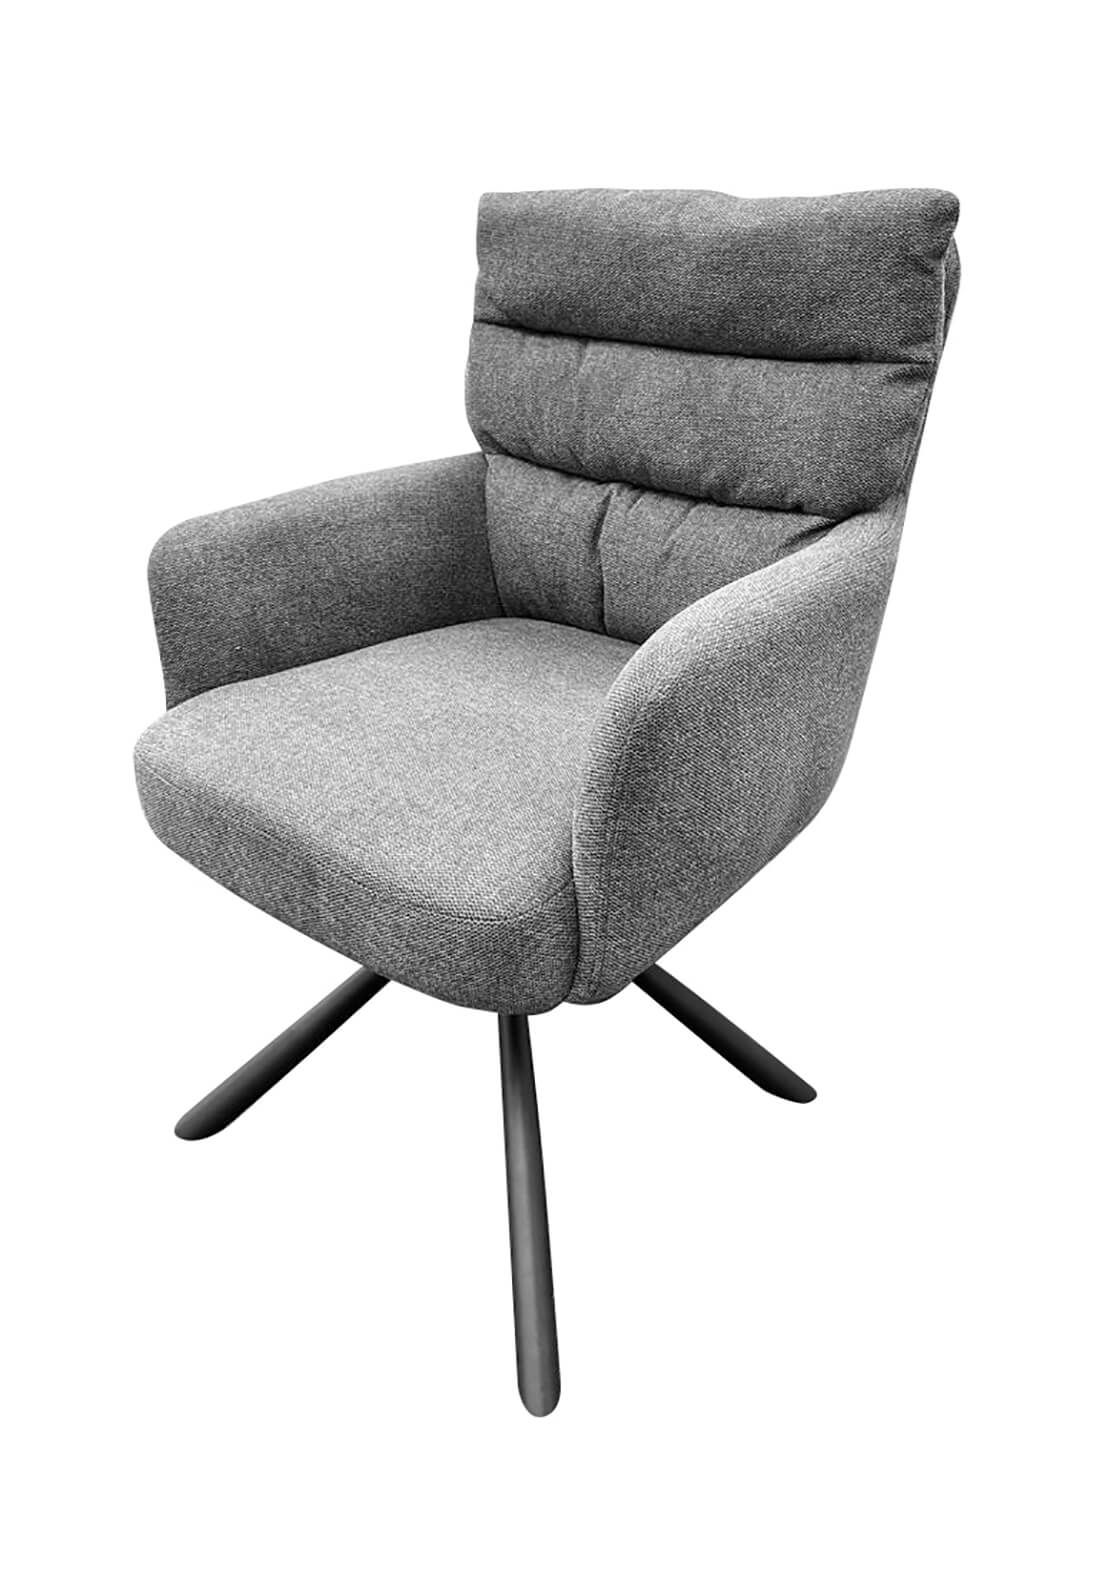 The Home Collection Stefan Swivel Dining Chair - Grey 2 Shaws Department Stores